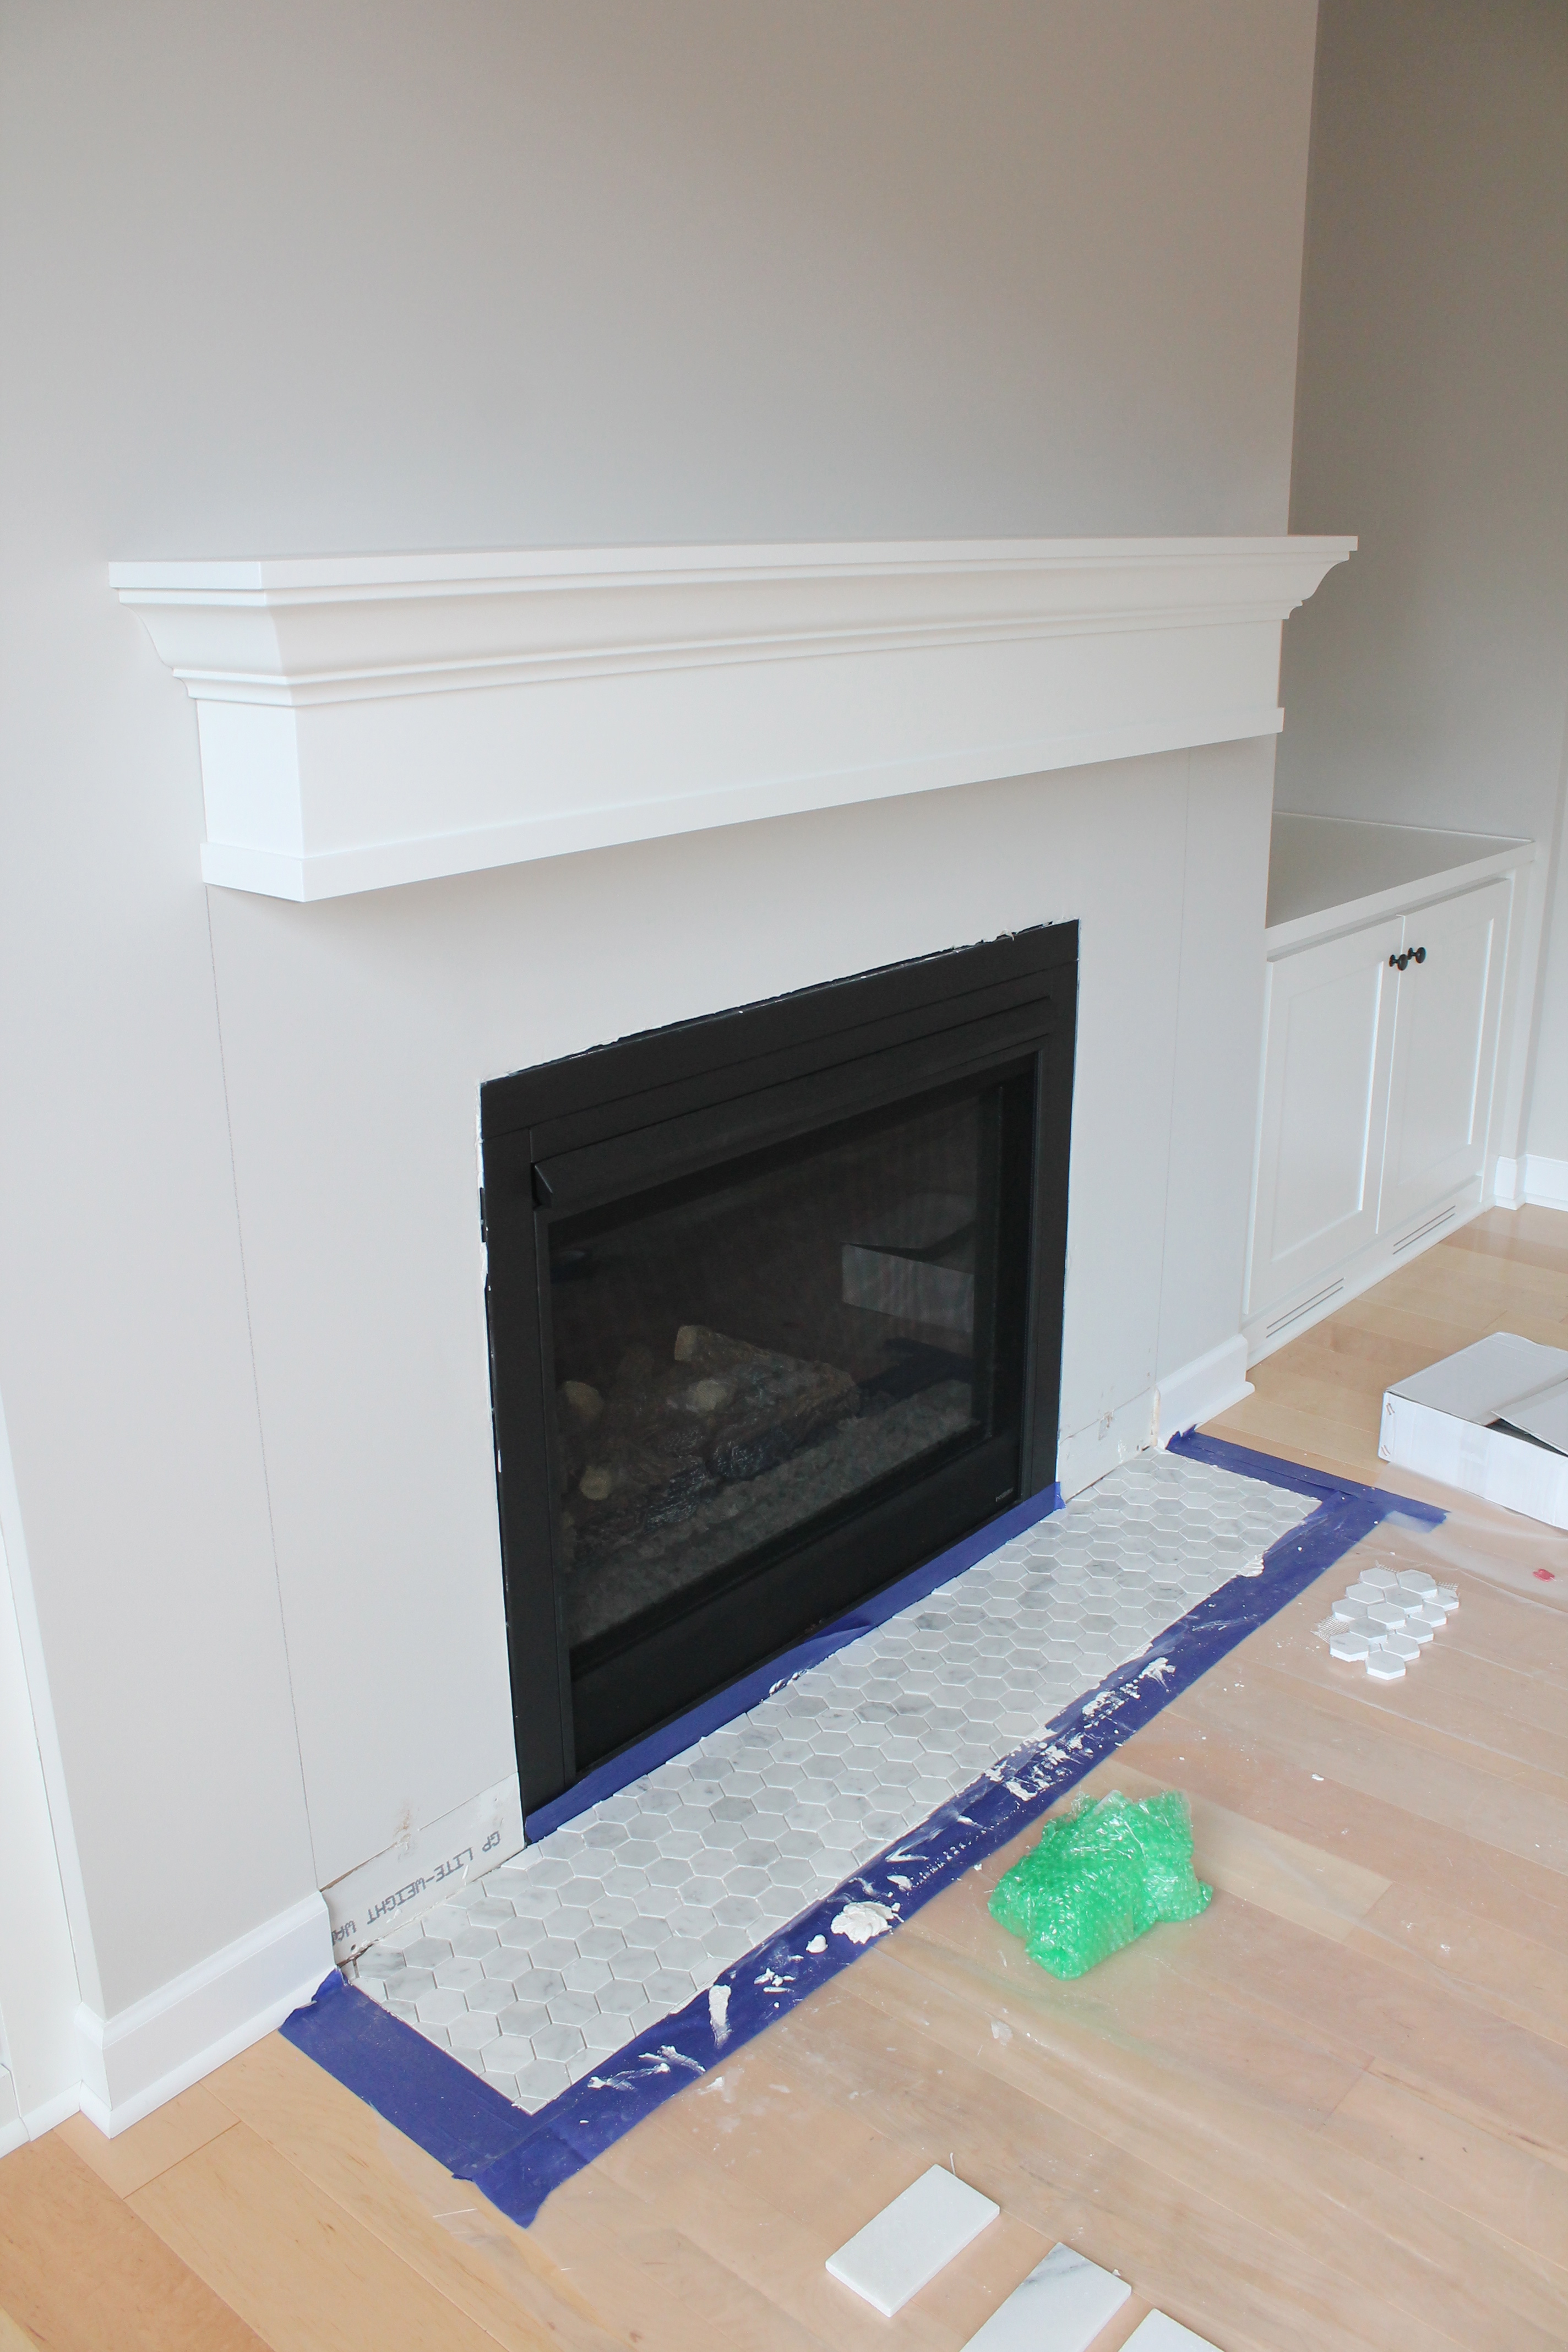 Marble tiles are a common way to add beauty to fireplaces. White is always a marketable and classic color. It is a bright color that reflects light and cleanliness. And marble is an ideal material for low traffic areas like fireplace surrounds. So this tile was a perfect choice!